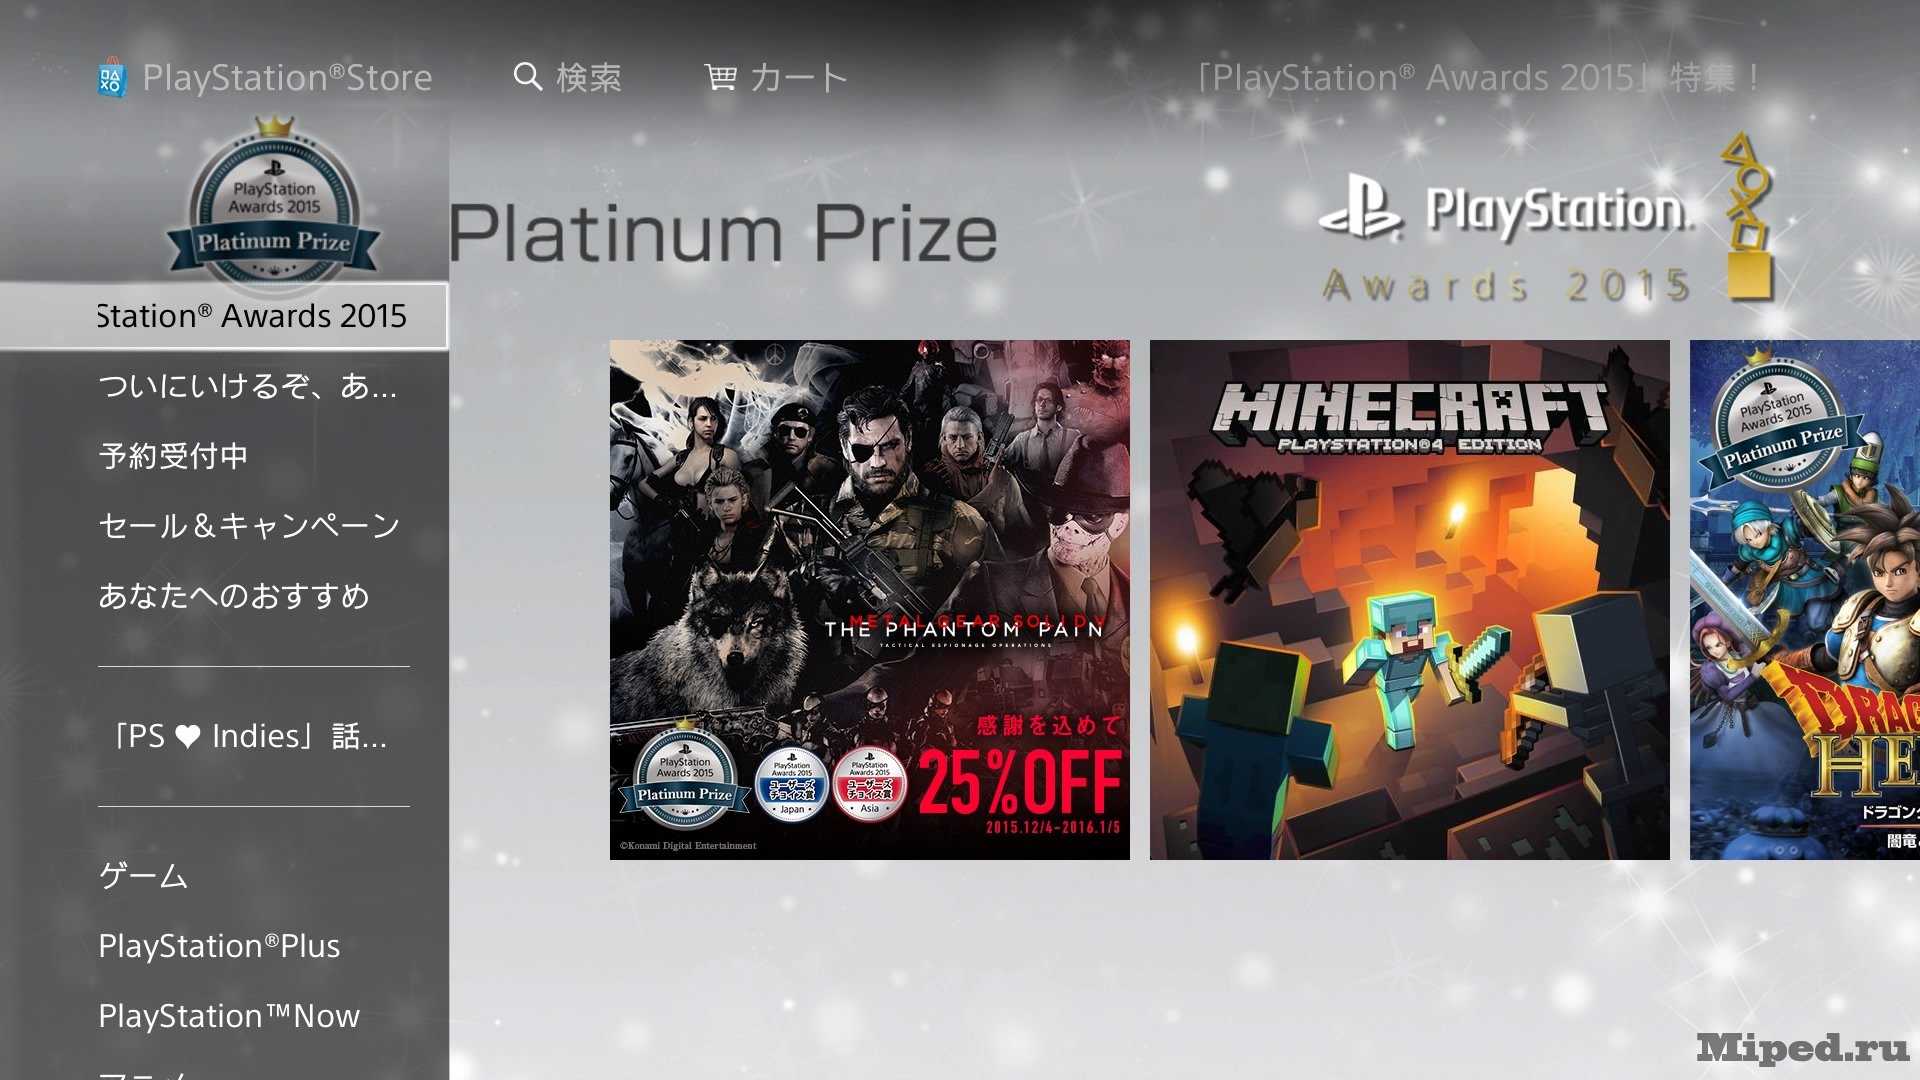 Dead nation: apocalypse edition trophy guides and psn price history